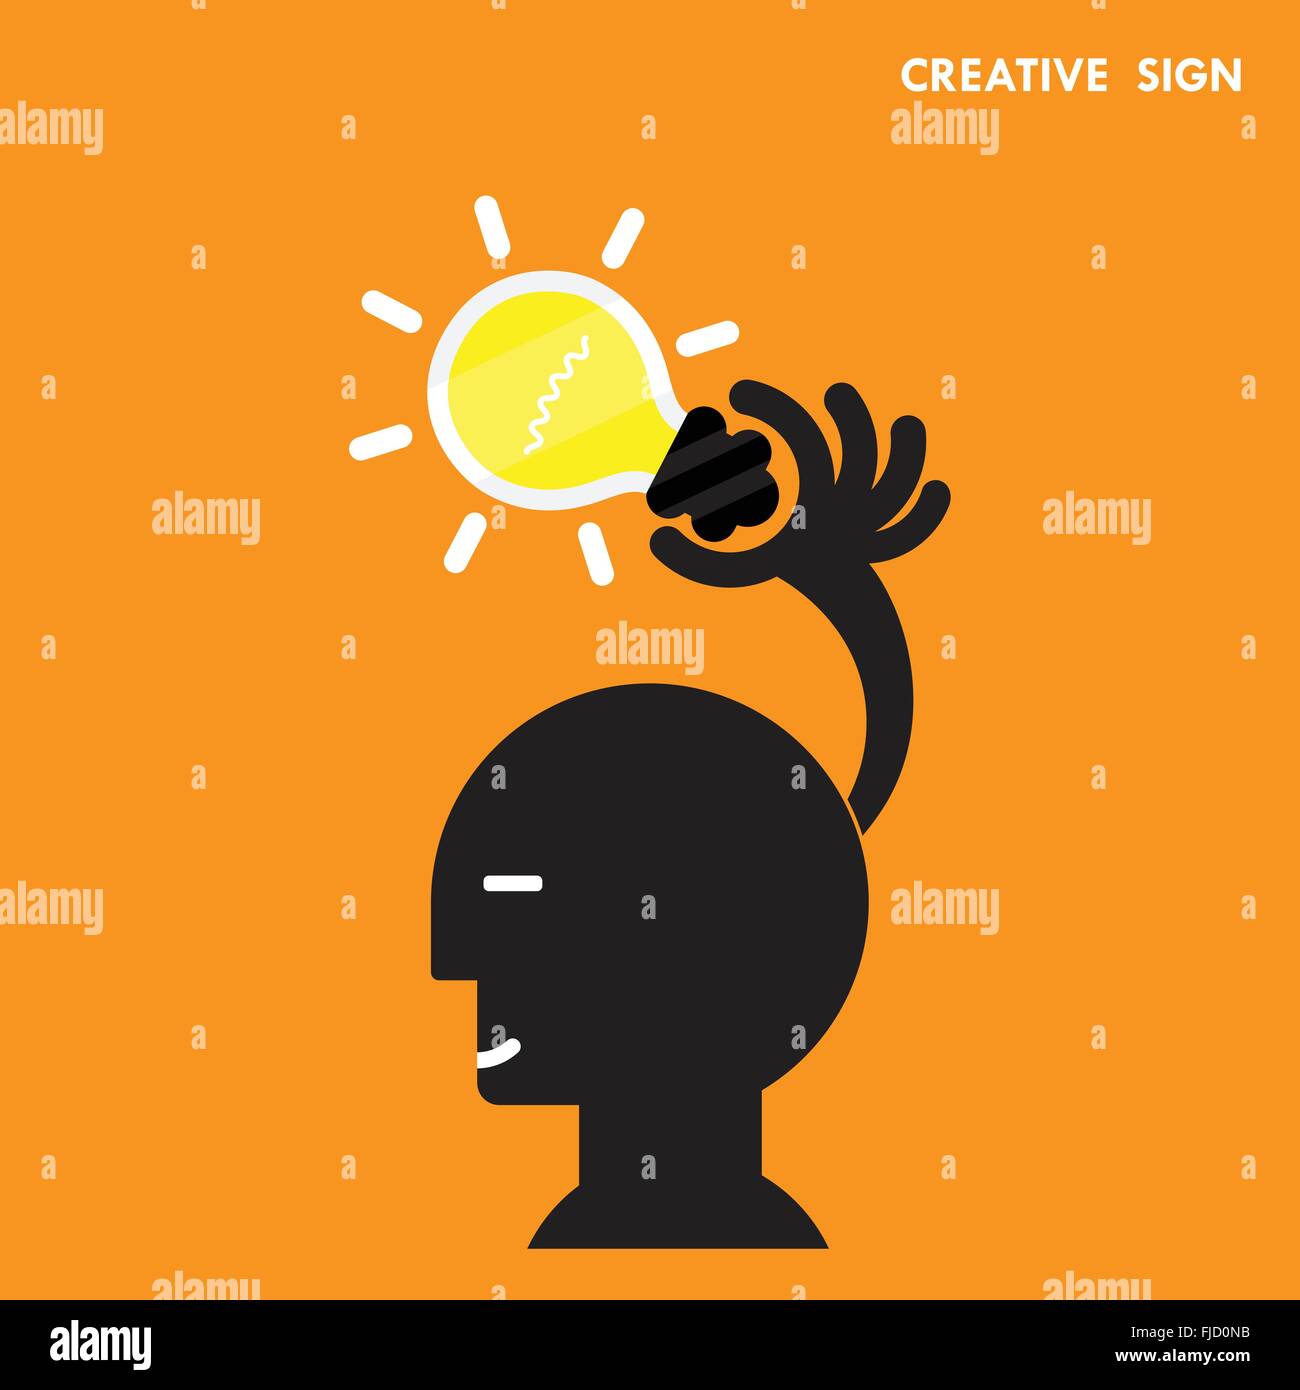 Head and Creative bulb light idea,flat design.Concept of ideas inspiration, innovation, invention, effective thinking, knowledge Stock Vector